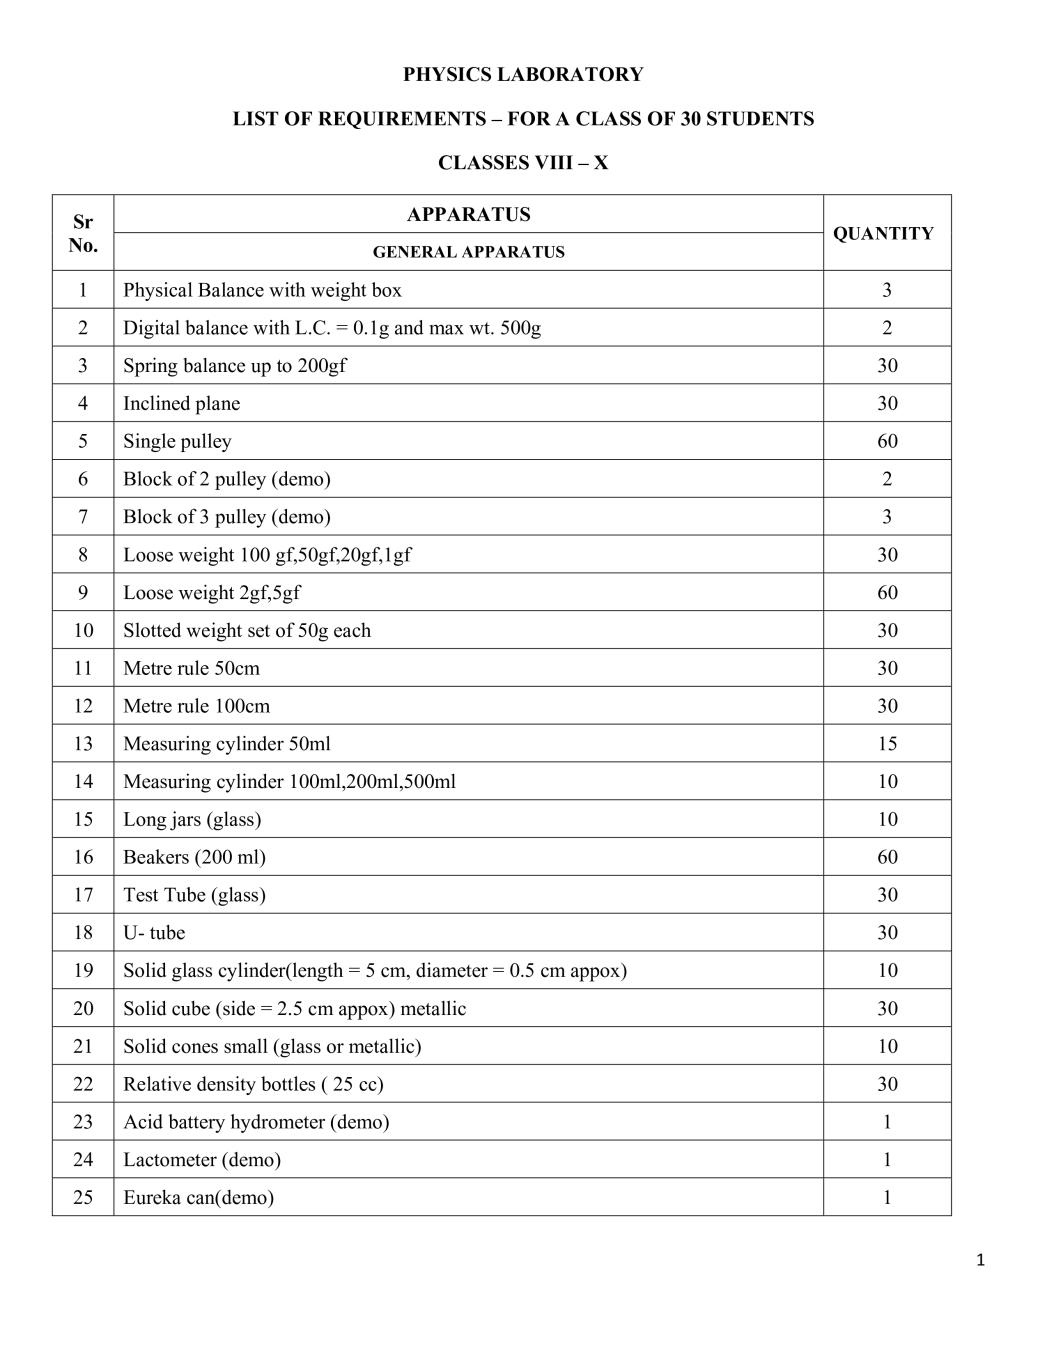 ICSE Physics Lab Manual for Class 8, 9, 10 - Page 1